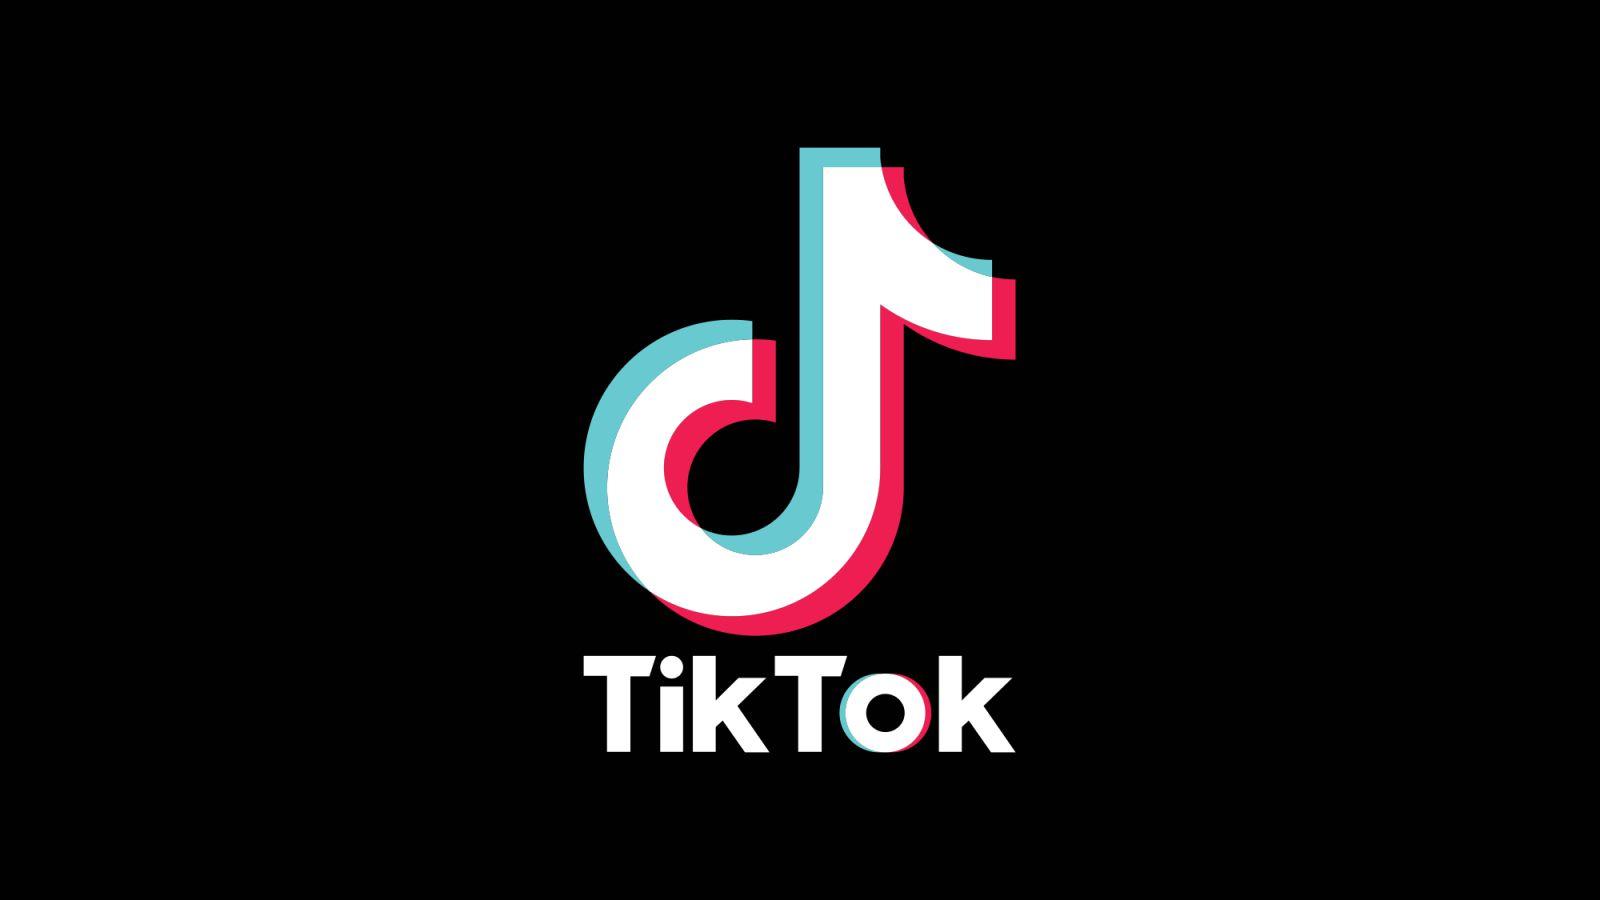 TikTok Logo - TikTok's In-App Browser Reportedly Capable of Monitoring Anything You Type  - MacRumors